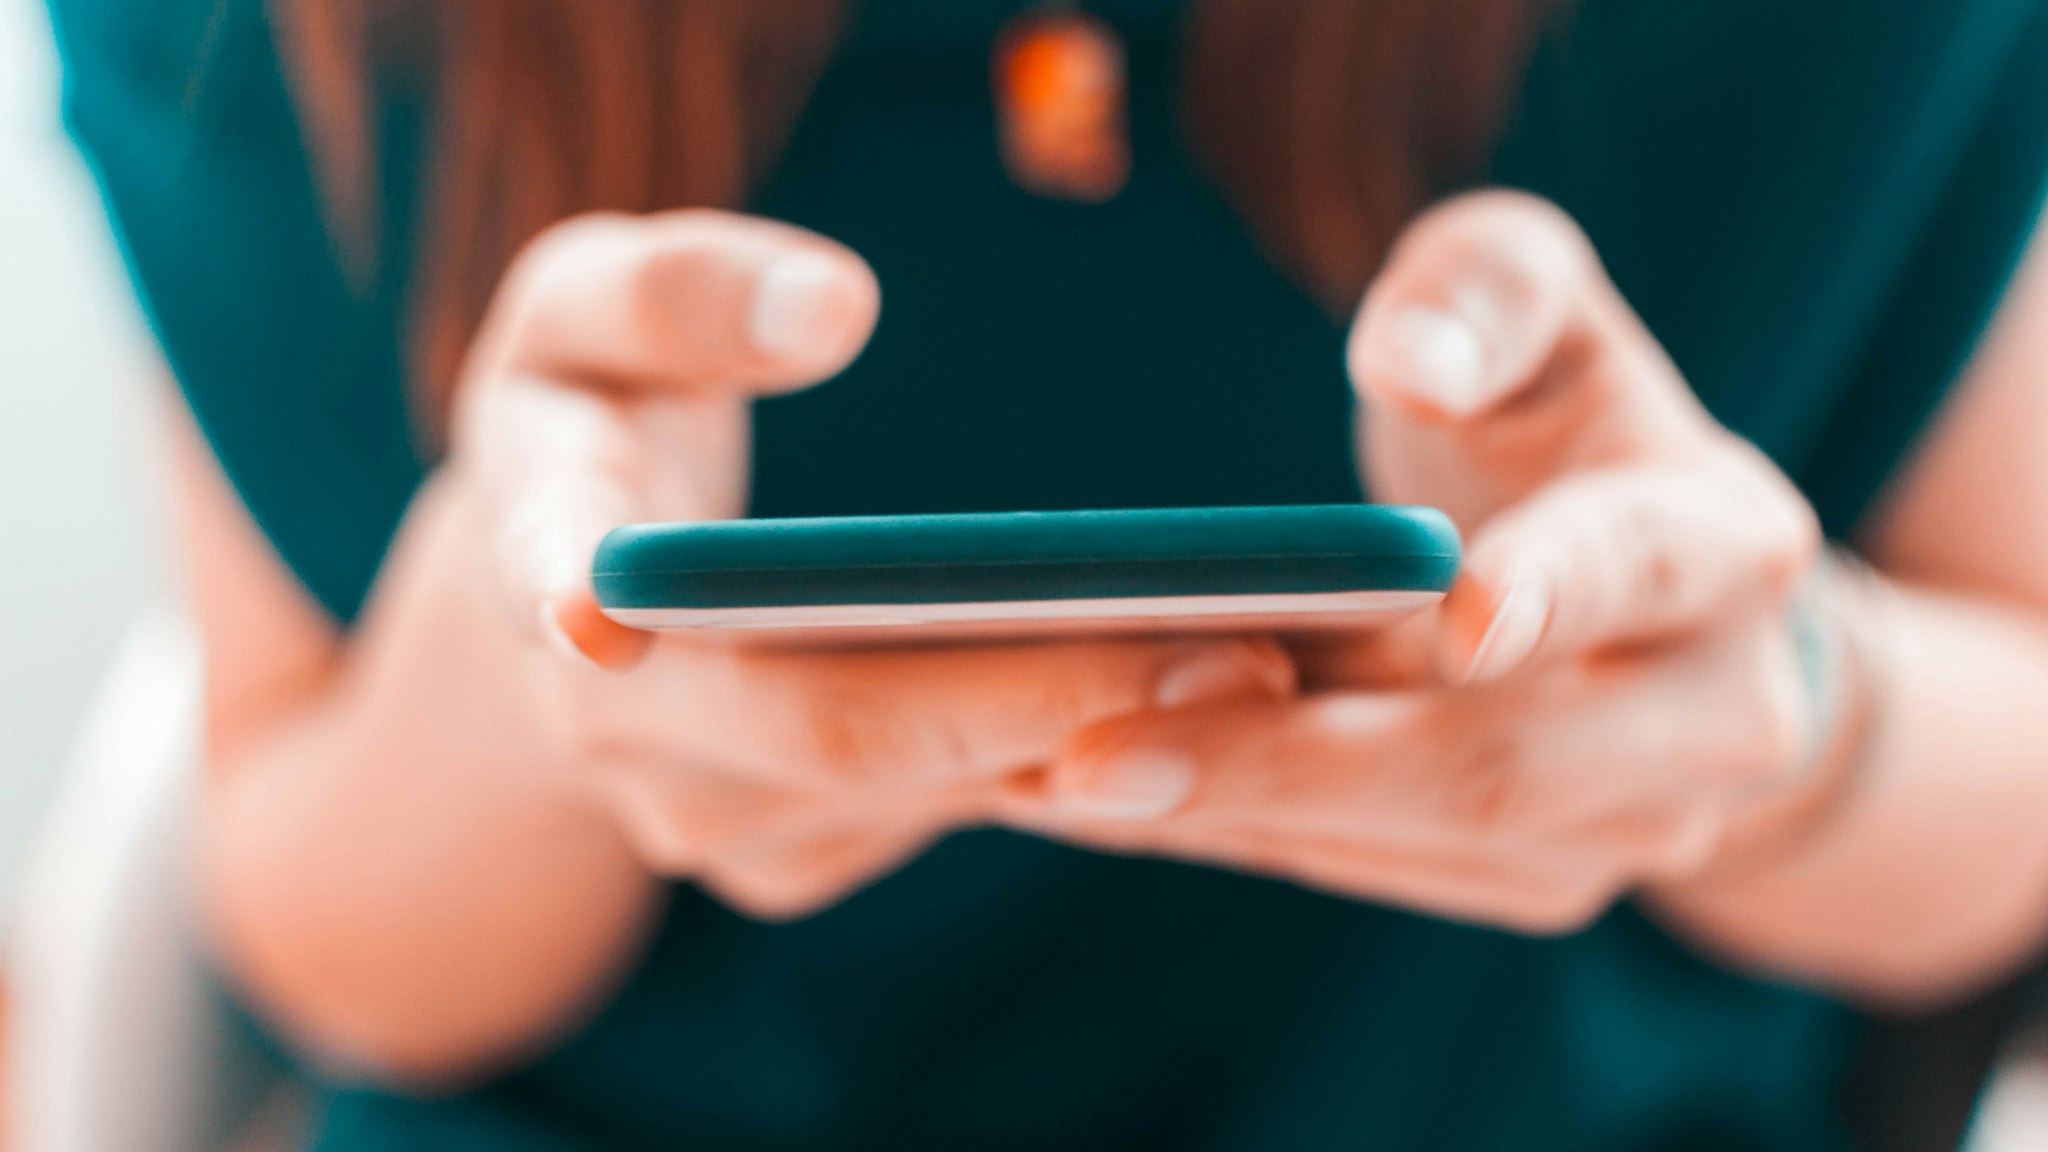 A young woman is using her smartphone - stock photo